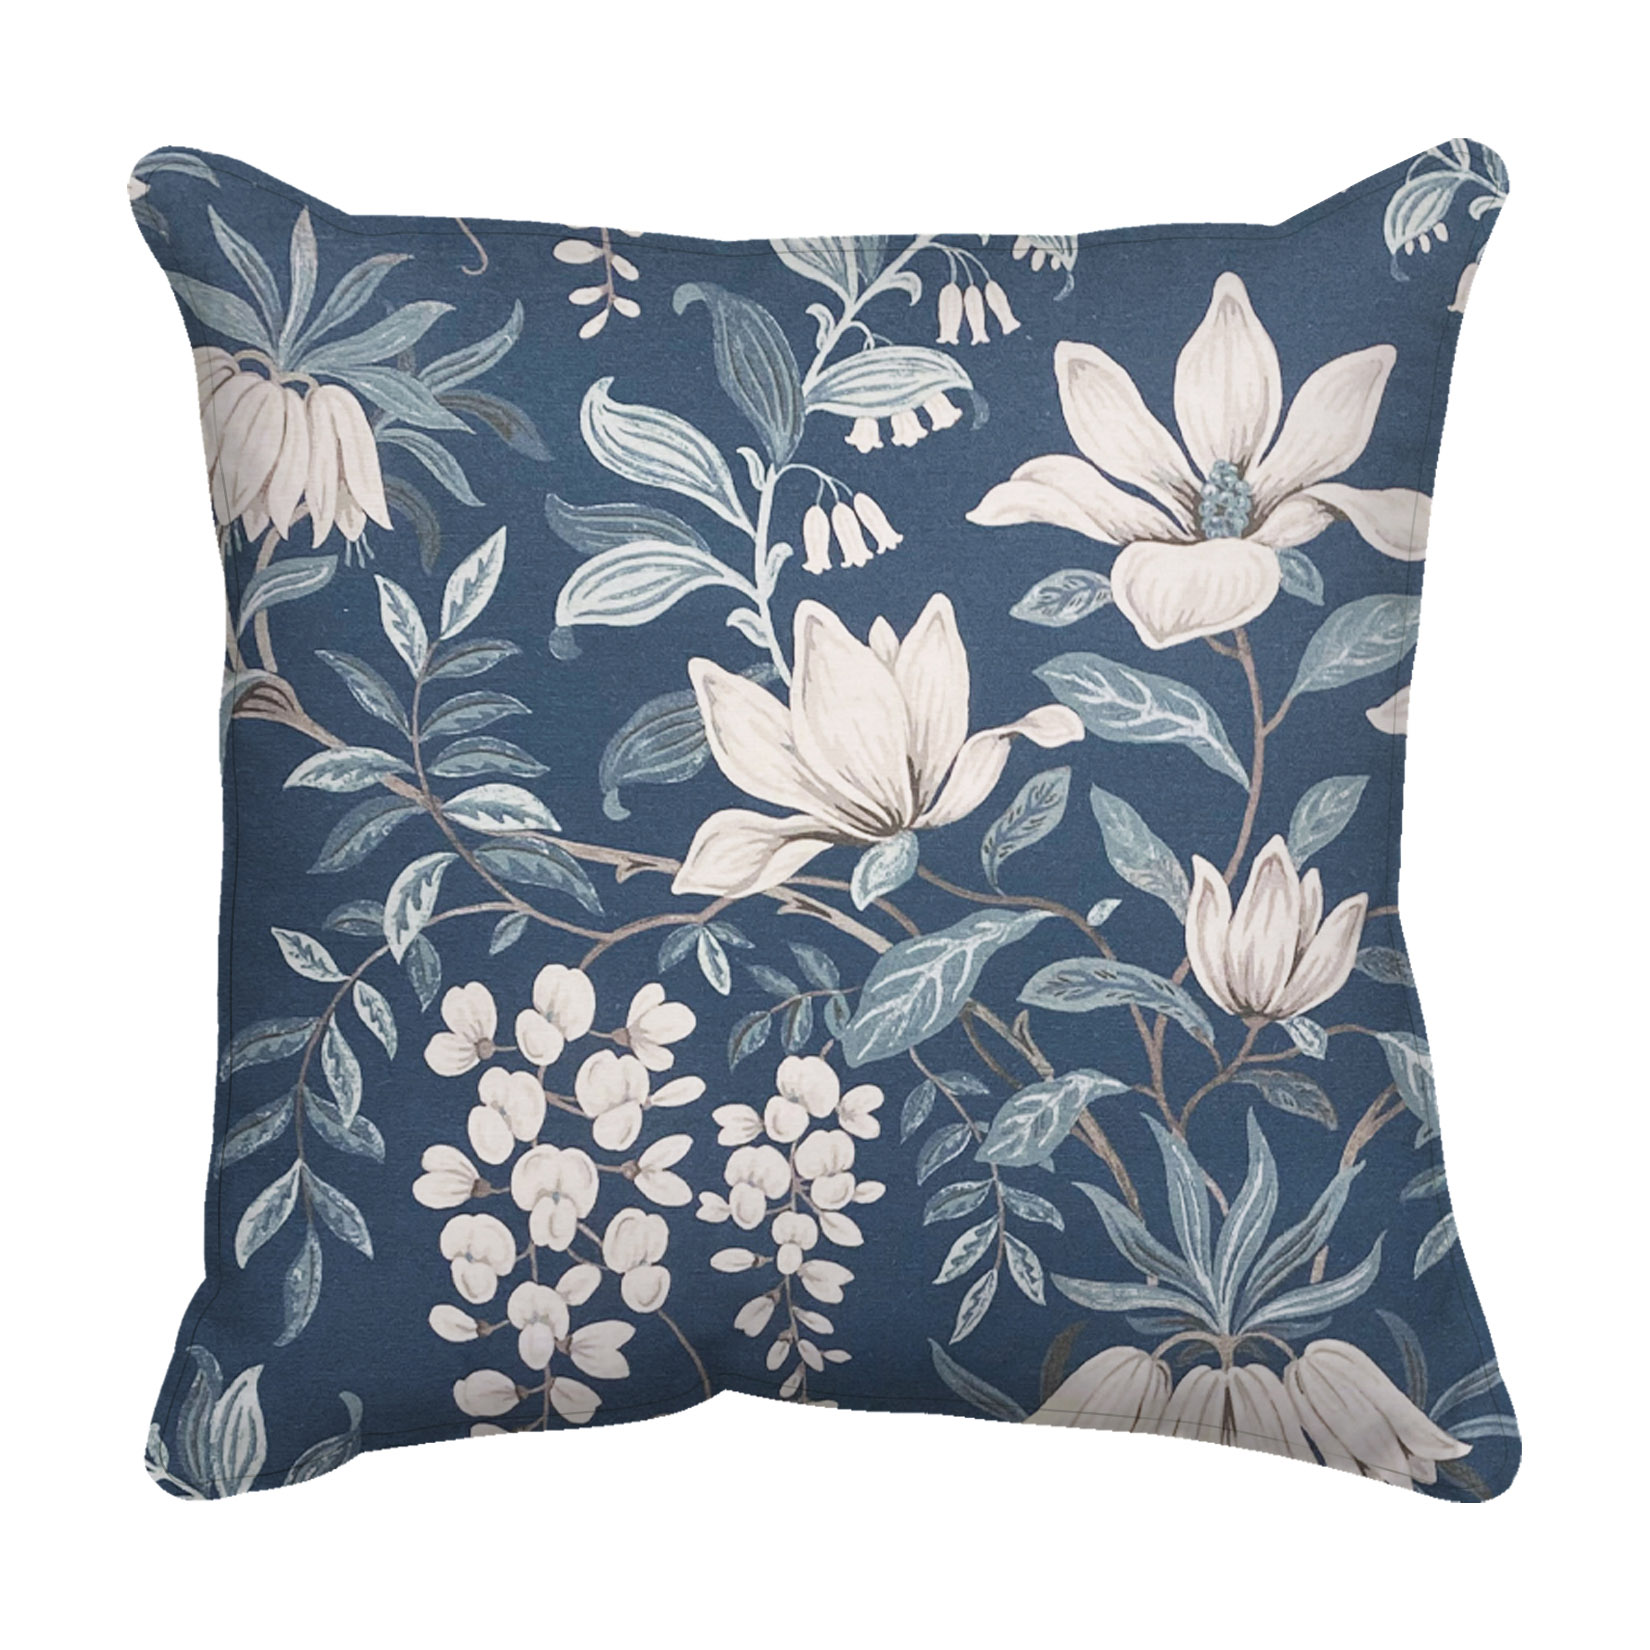 Laura Ashley Parterre Seaspray Outdoor Cushion | Rooms By Me